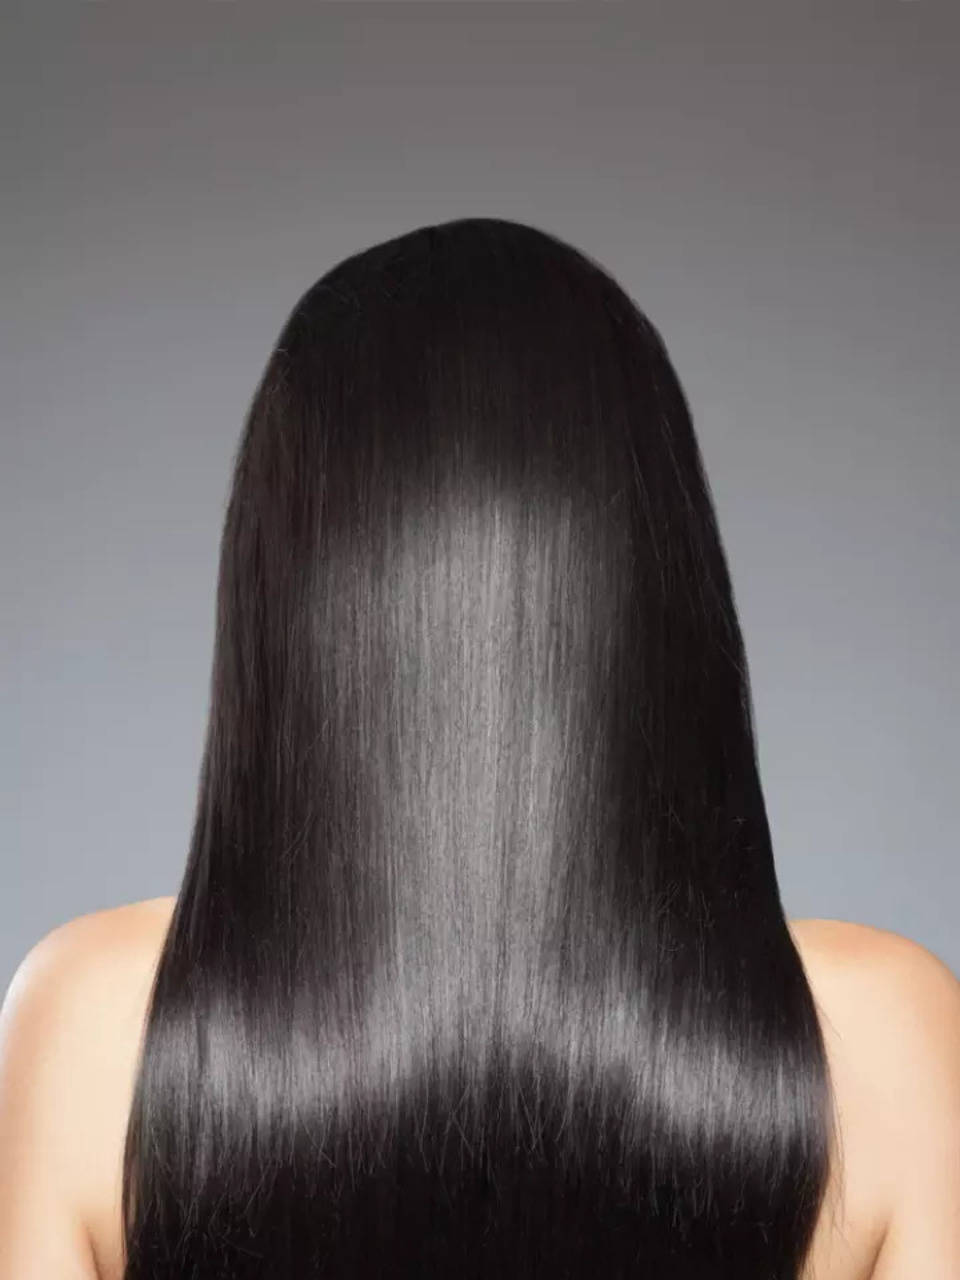 Hair mask to naturally straighten your hair | Times of India